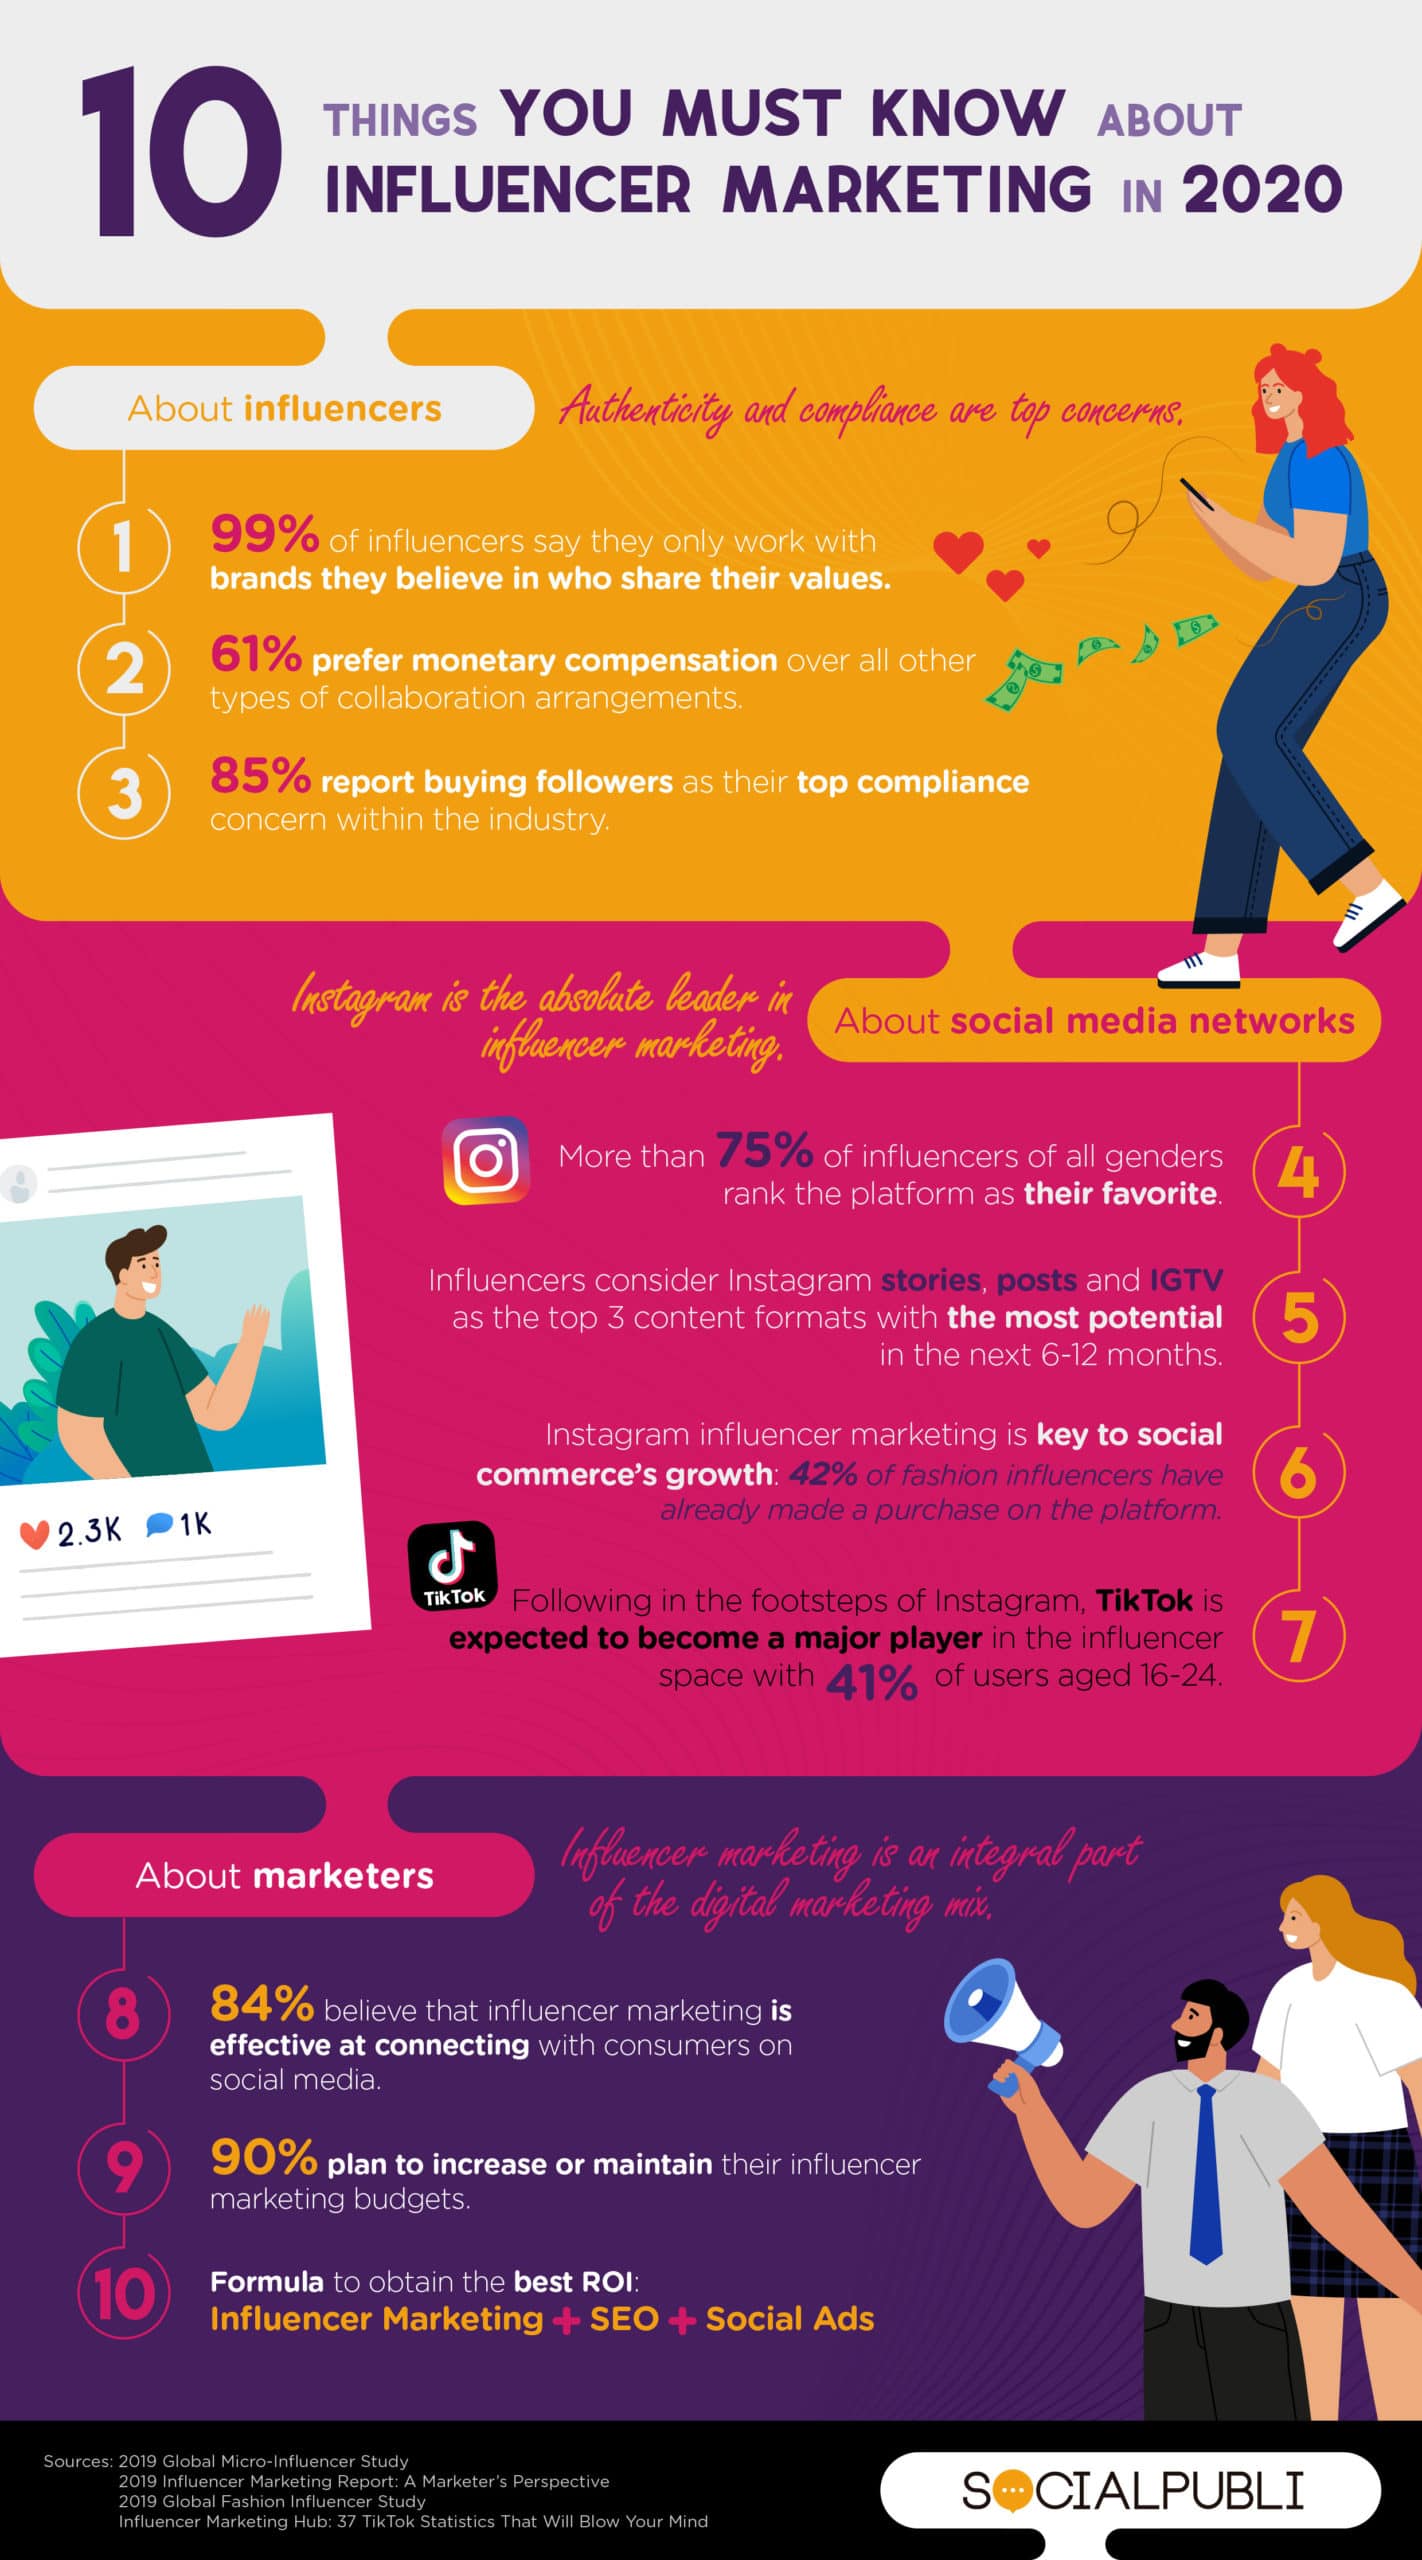 10 things you must know about influencer marketing in 2020